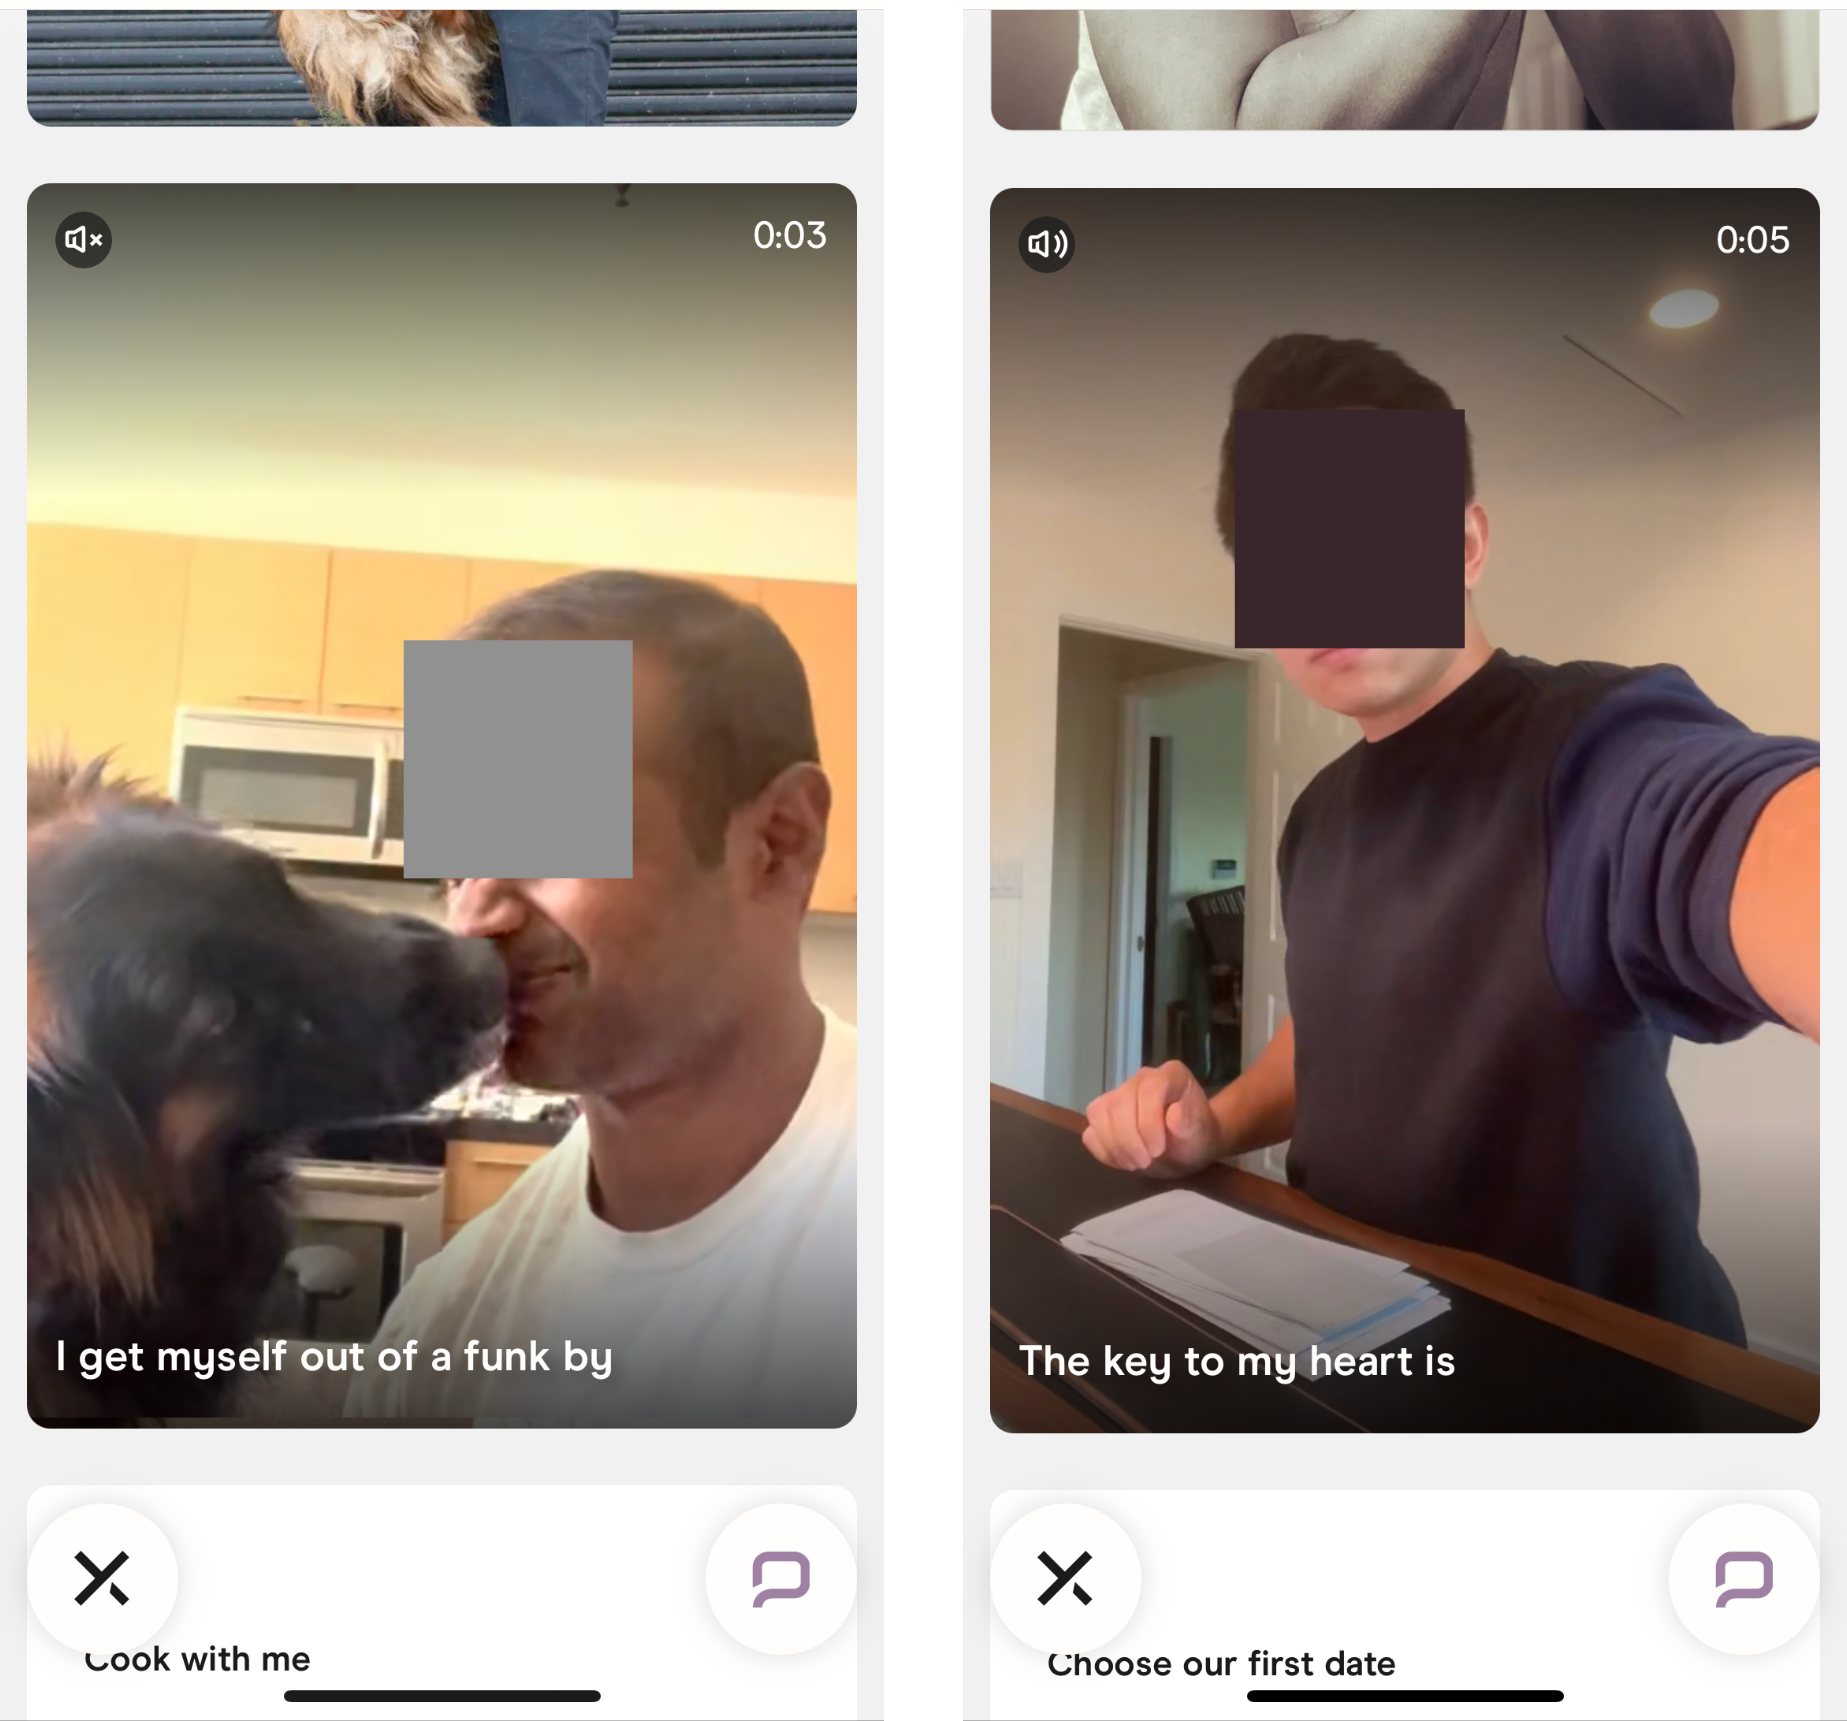 New Hinge Video Prompts Could Give You a Better Feel for Your Matches - CNET